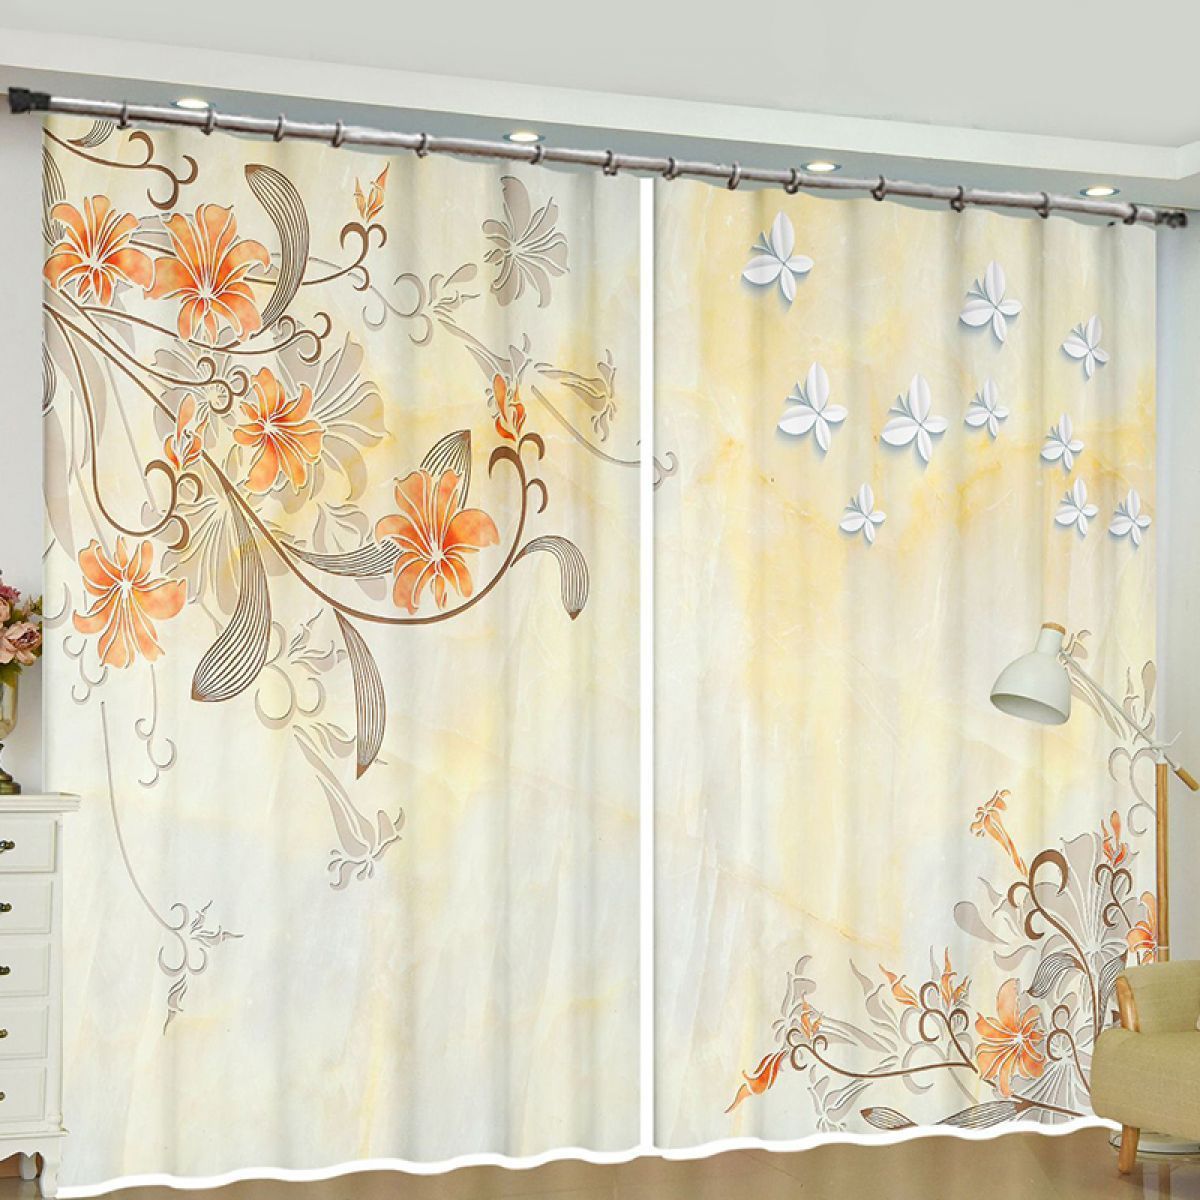 Collaborate-style Painting Of Floral And Butterfly Printed Window Curtain Home Decor